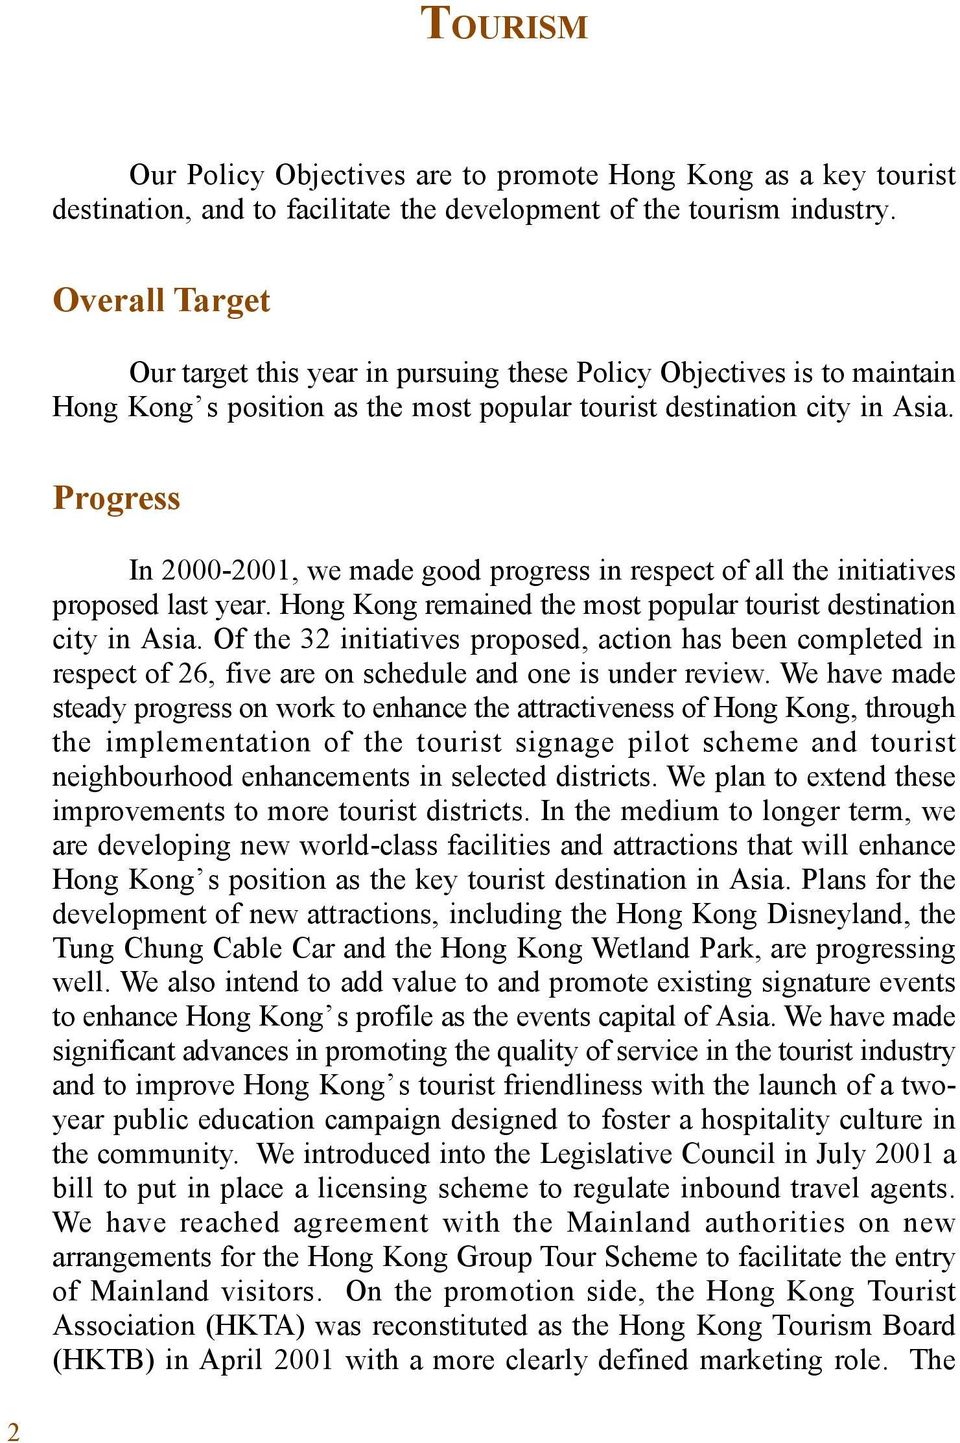 Progress In 2000-2001, we made good progress in respect of all the initiatives proposed last year. Hong Kong remained the most popular tourist destination city in Asia.